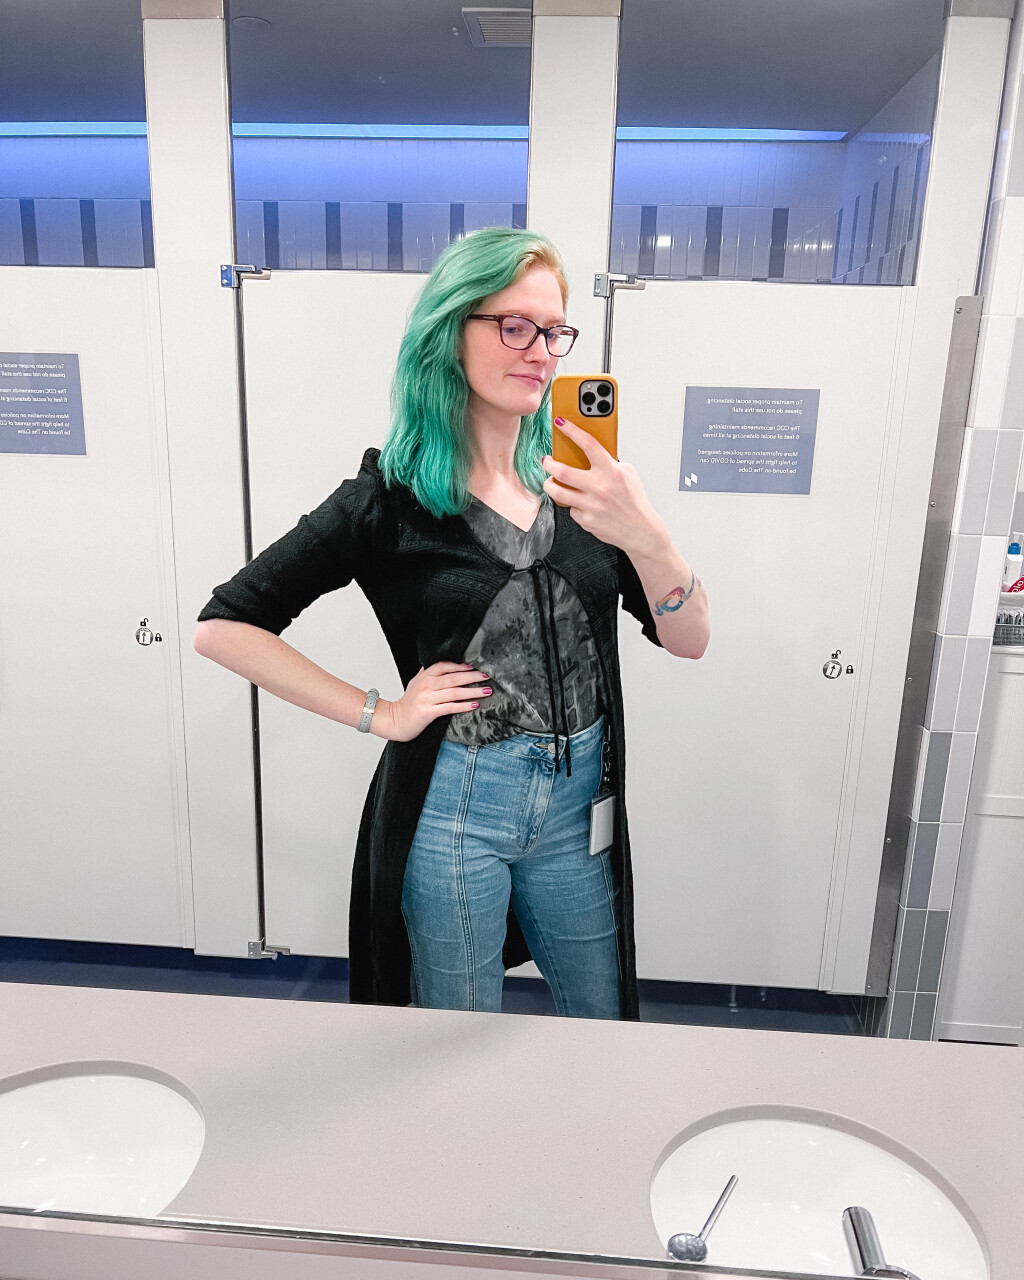 Another mirror selfie. Beth's wearing a long black cardigan (almost a cape) over jeans and a blouse